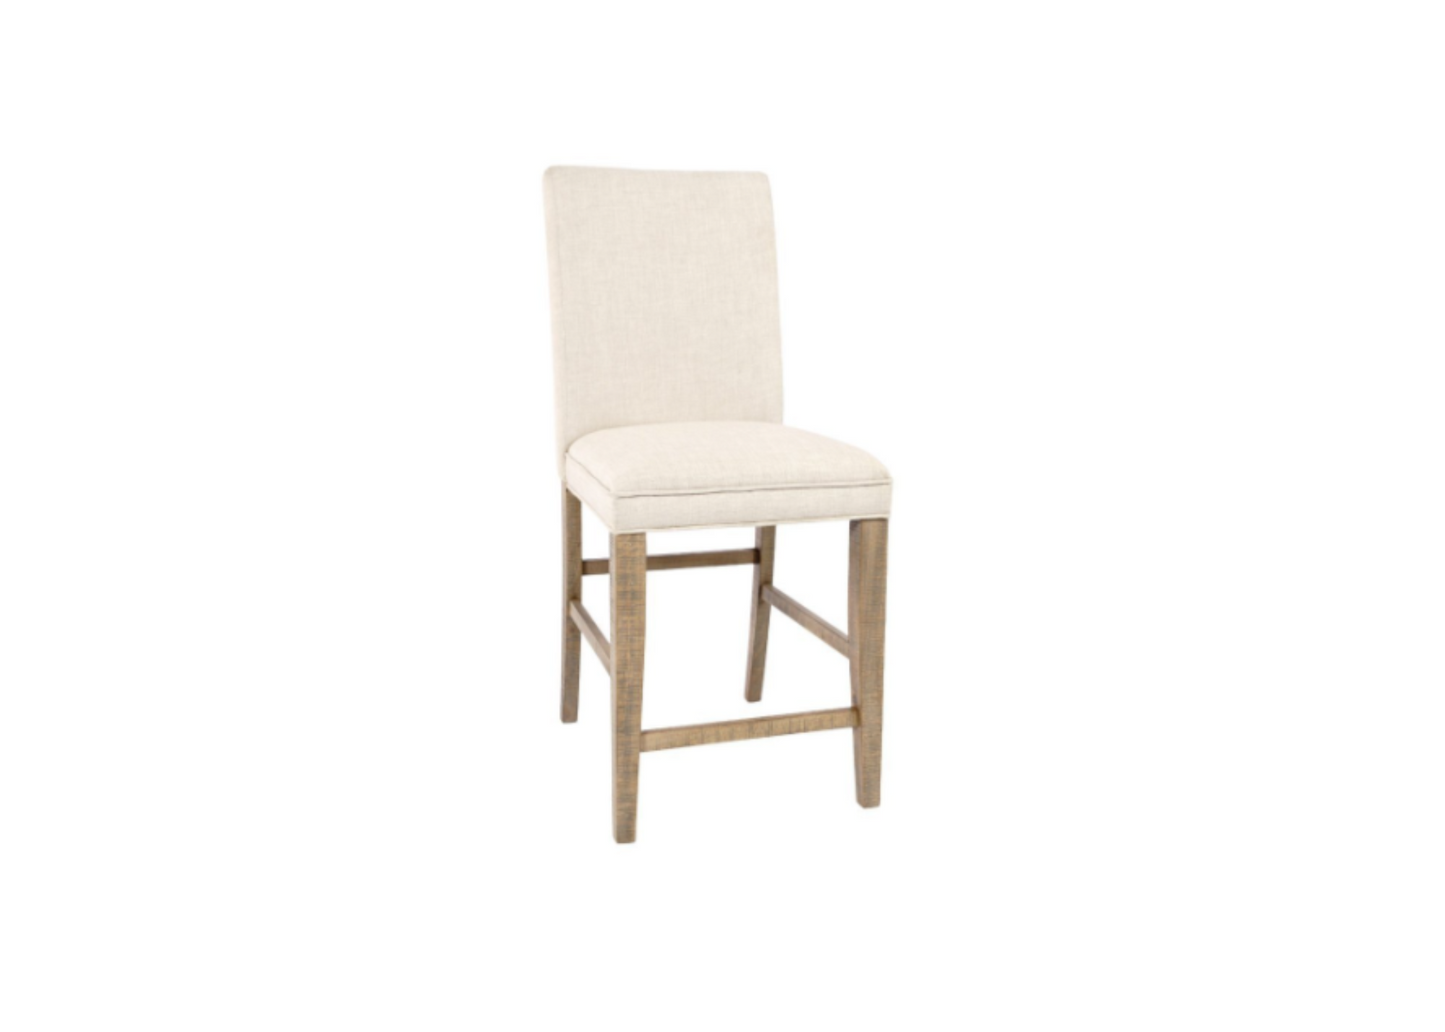 Carlyle Crossing Upholstered Counter Stool